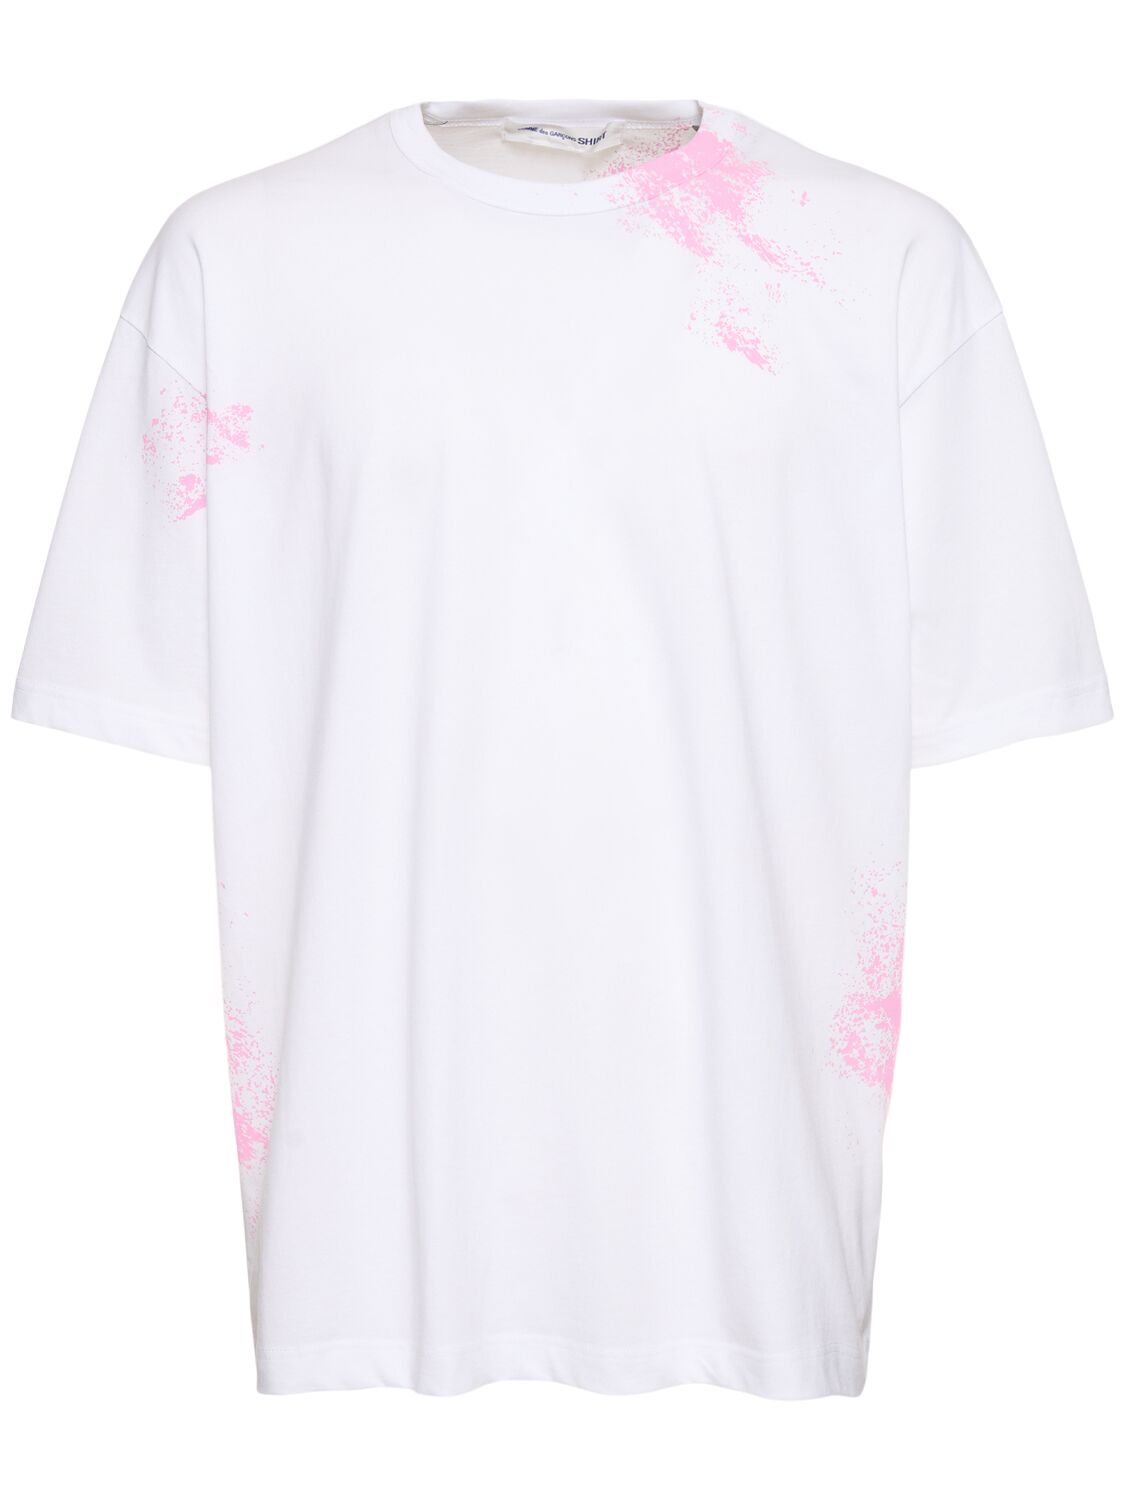 Image of Printed Cotton T-shirt